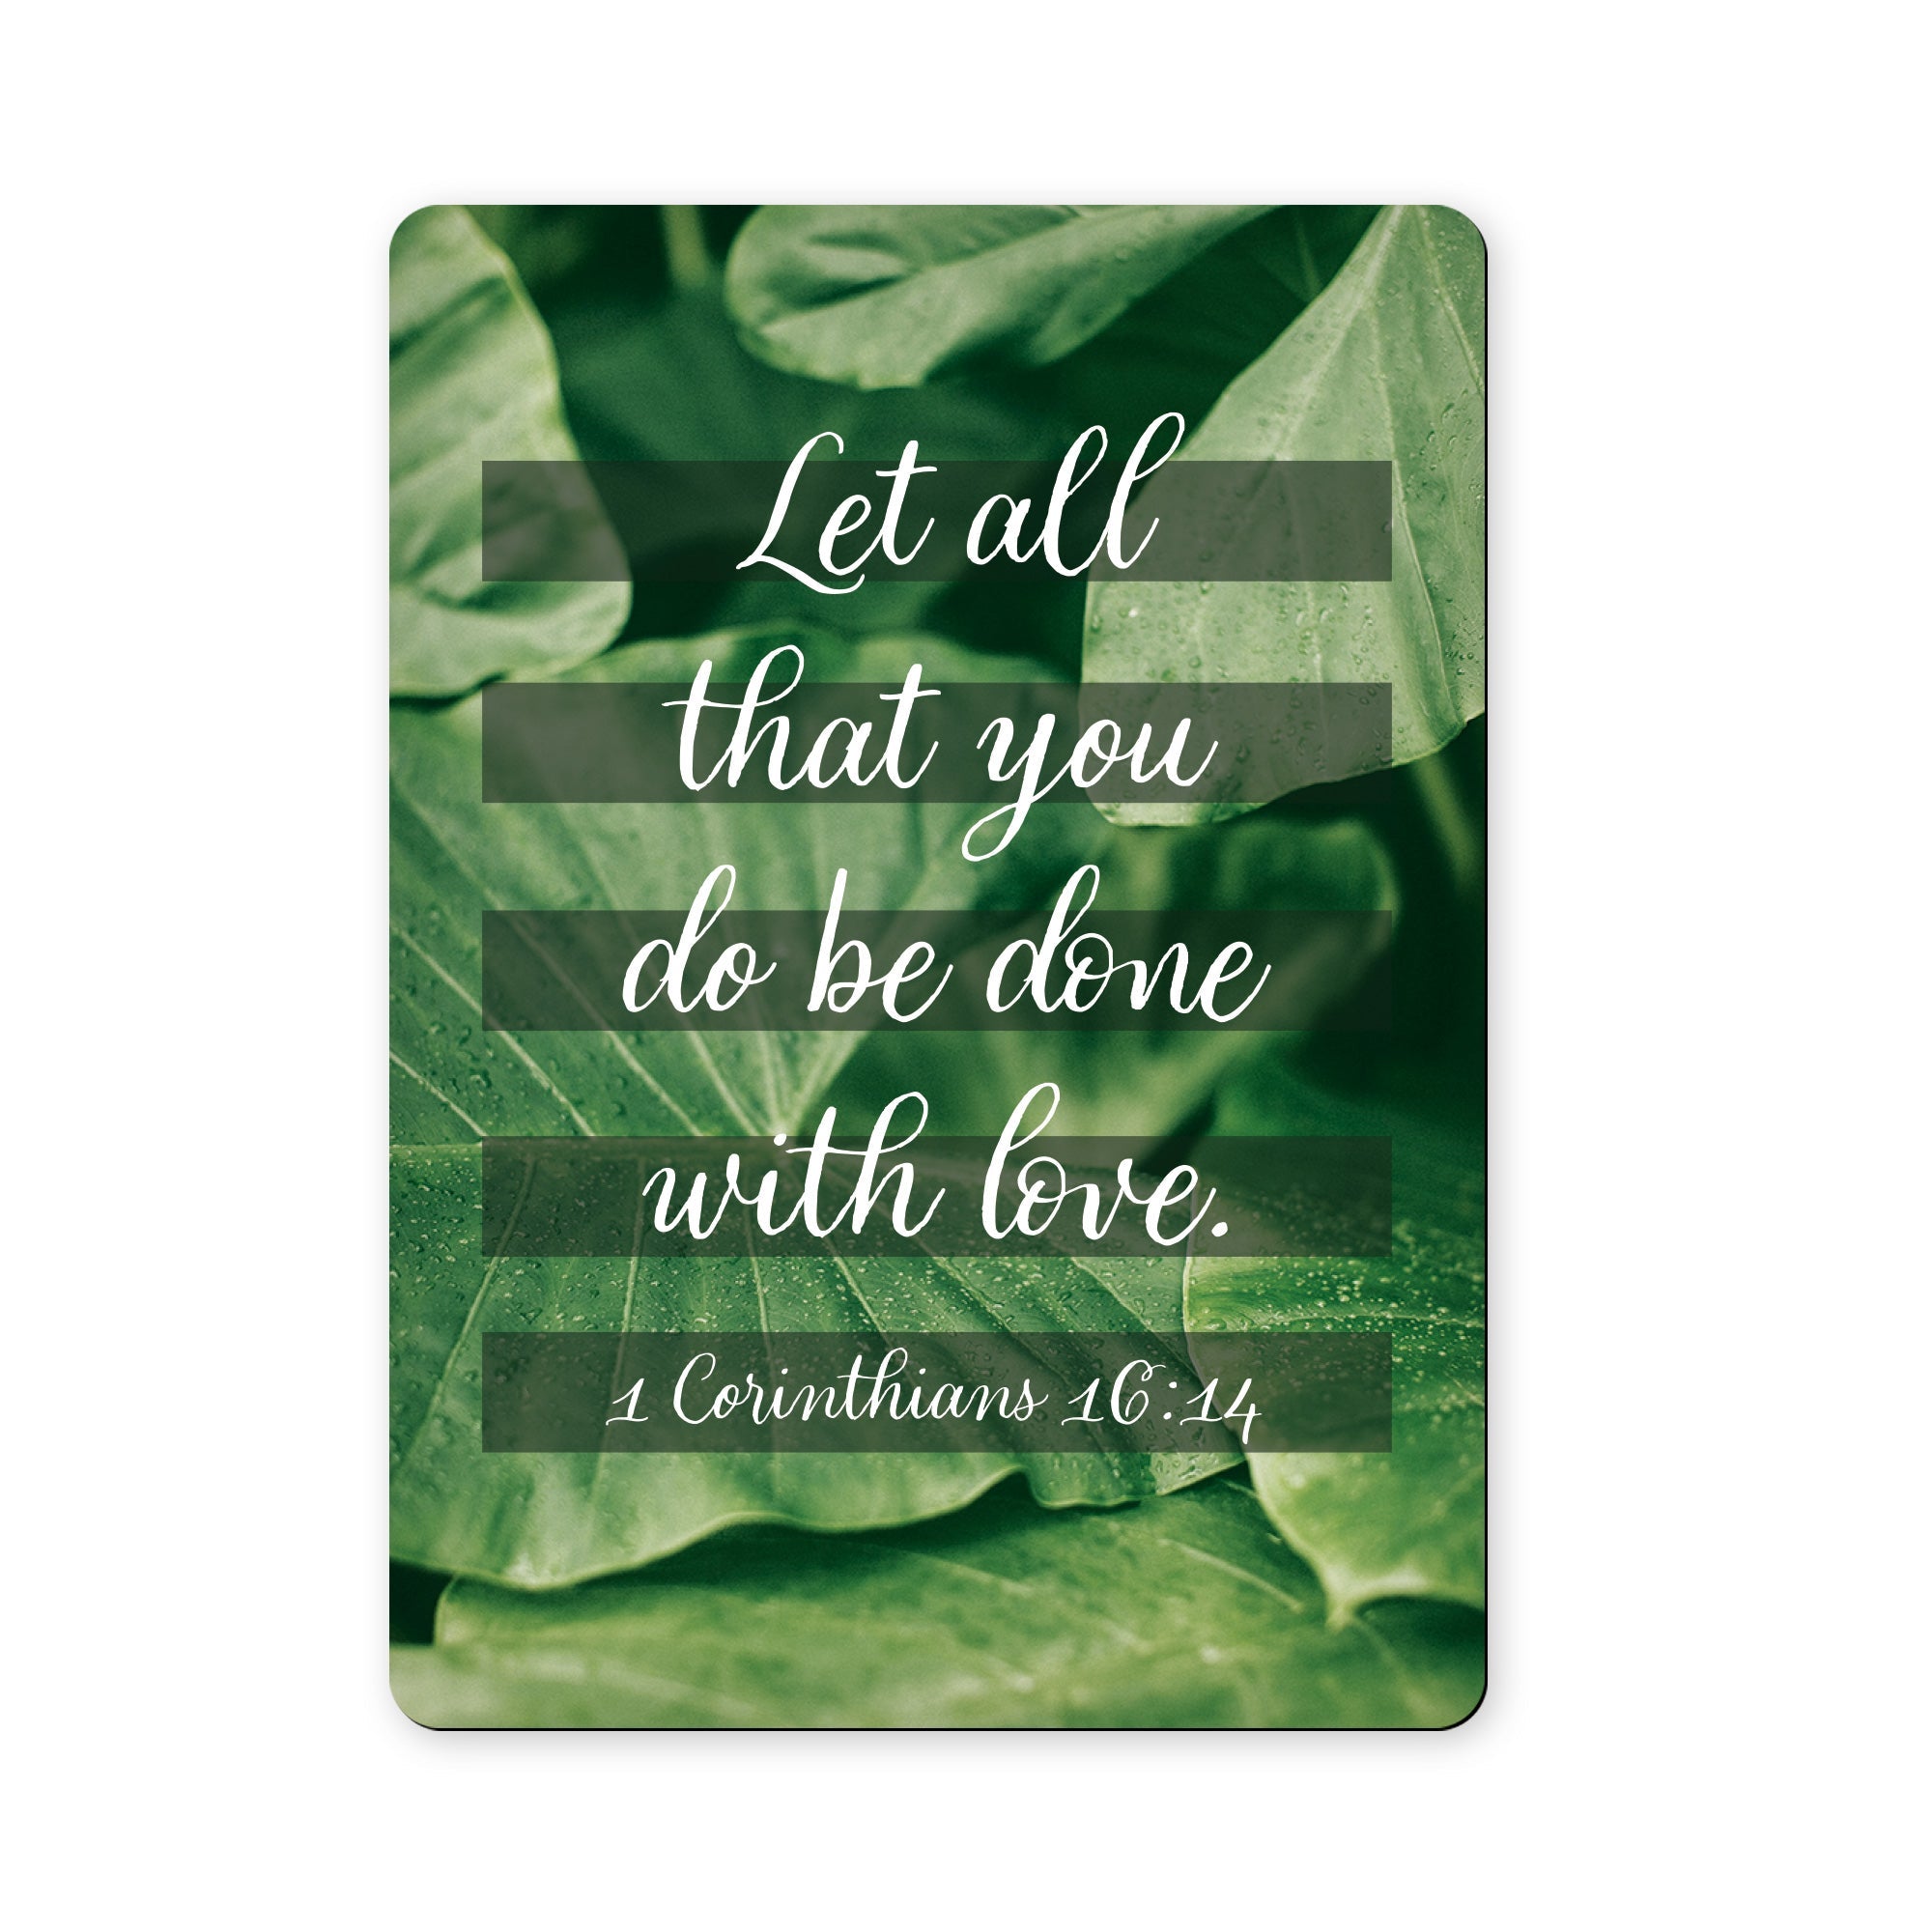 Let All That You Do Be Done with Love - 1 Corinthians 16:14 - Scripture Magnet